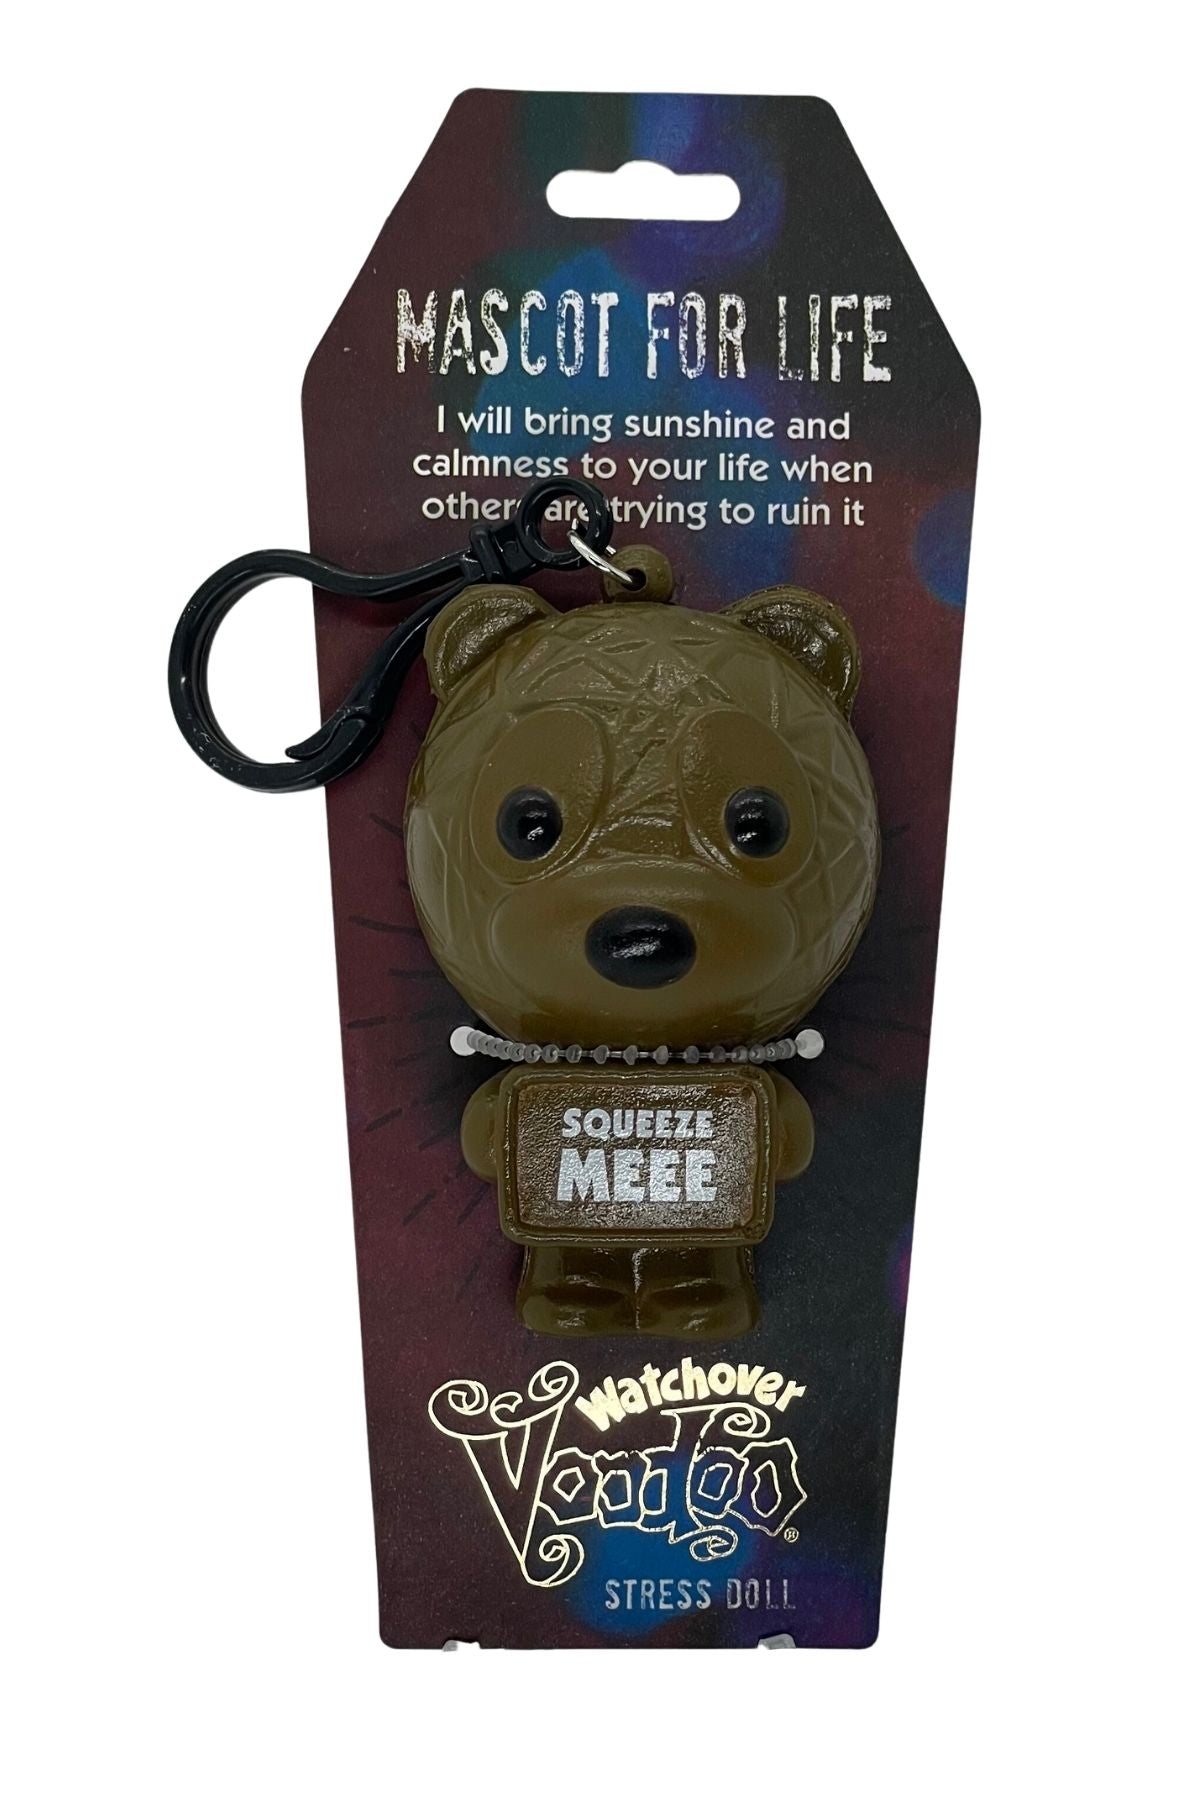 Voodoo Stress Doll -  Mascot For Life